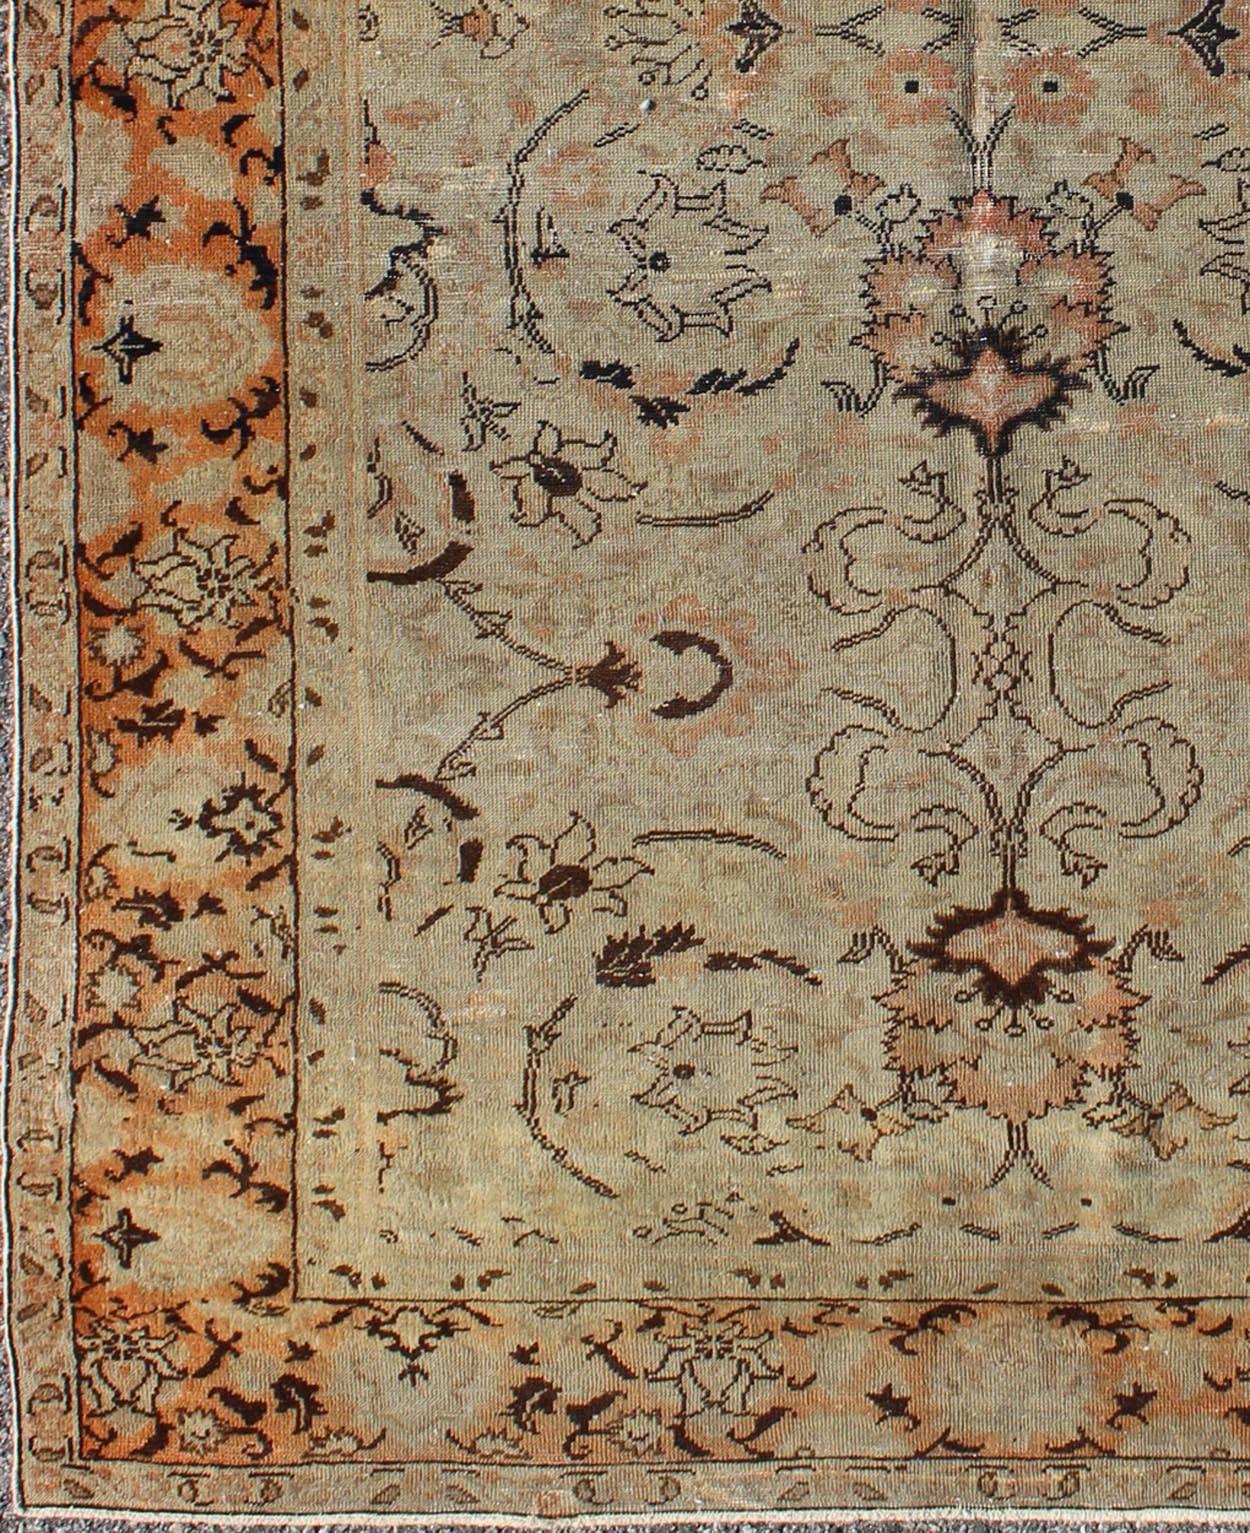 Floral Antique Fine Weave Turkish Sivas Rug With Neutral Color Palette and Pops of Color. Keivan Woven Arts /  rug EL-16369, country of origin / type: Turkey / Sivas, circa 1920
The design of this beautiful antique Oushak rug from early 20th century